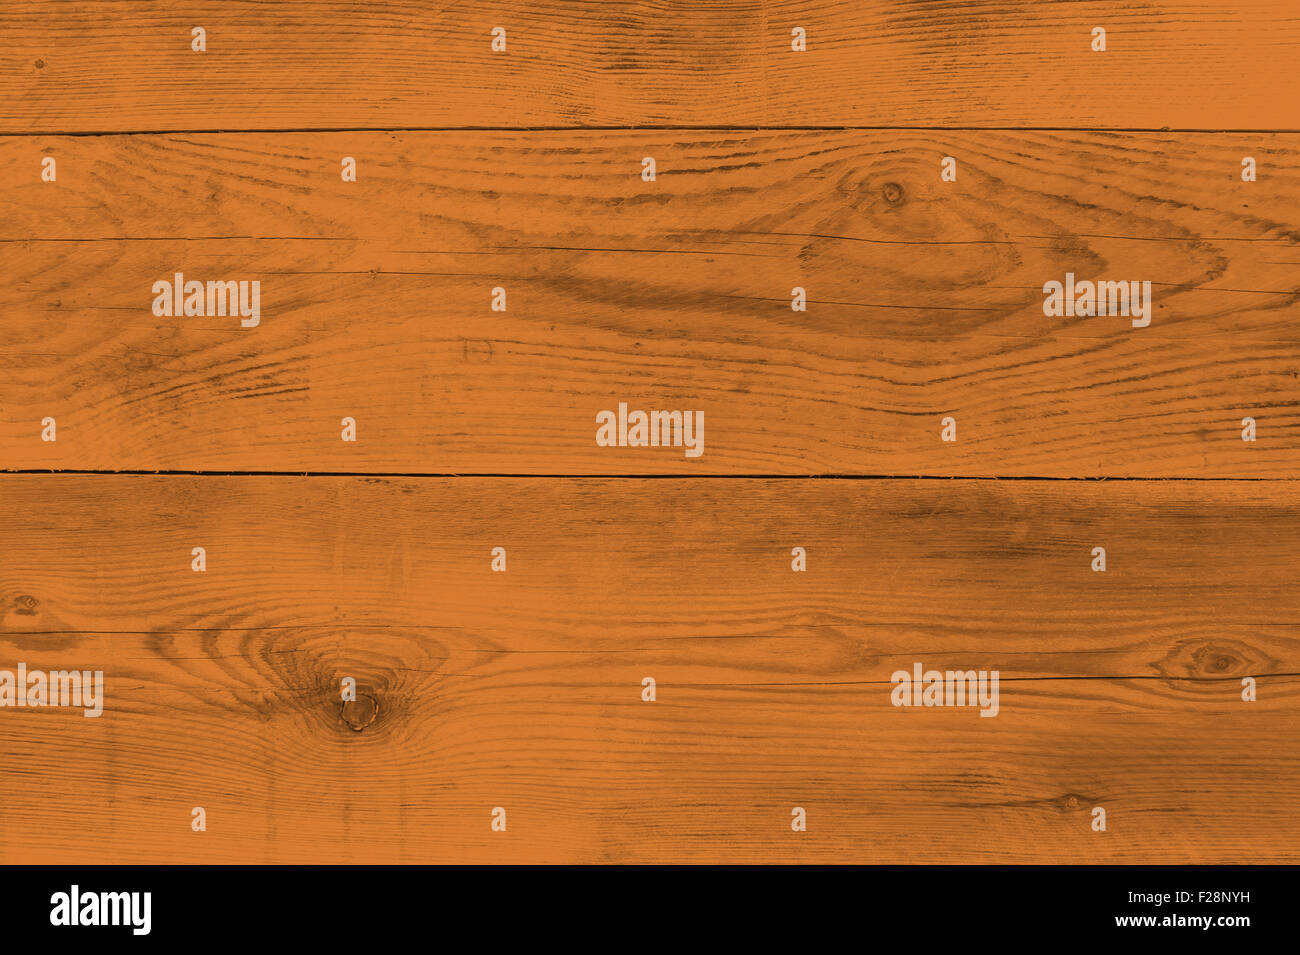 Orange wood structure as a background texture. Stock Photo